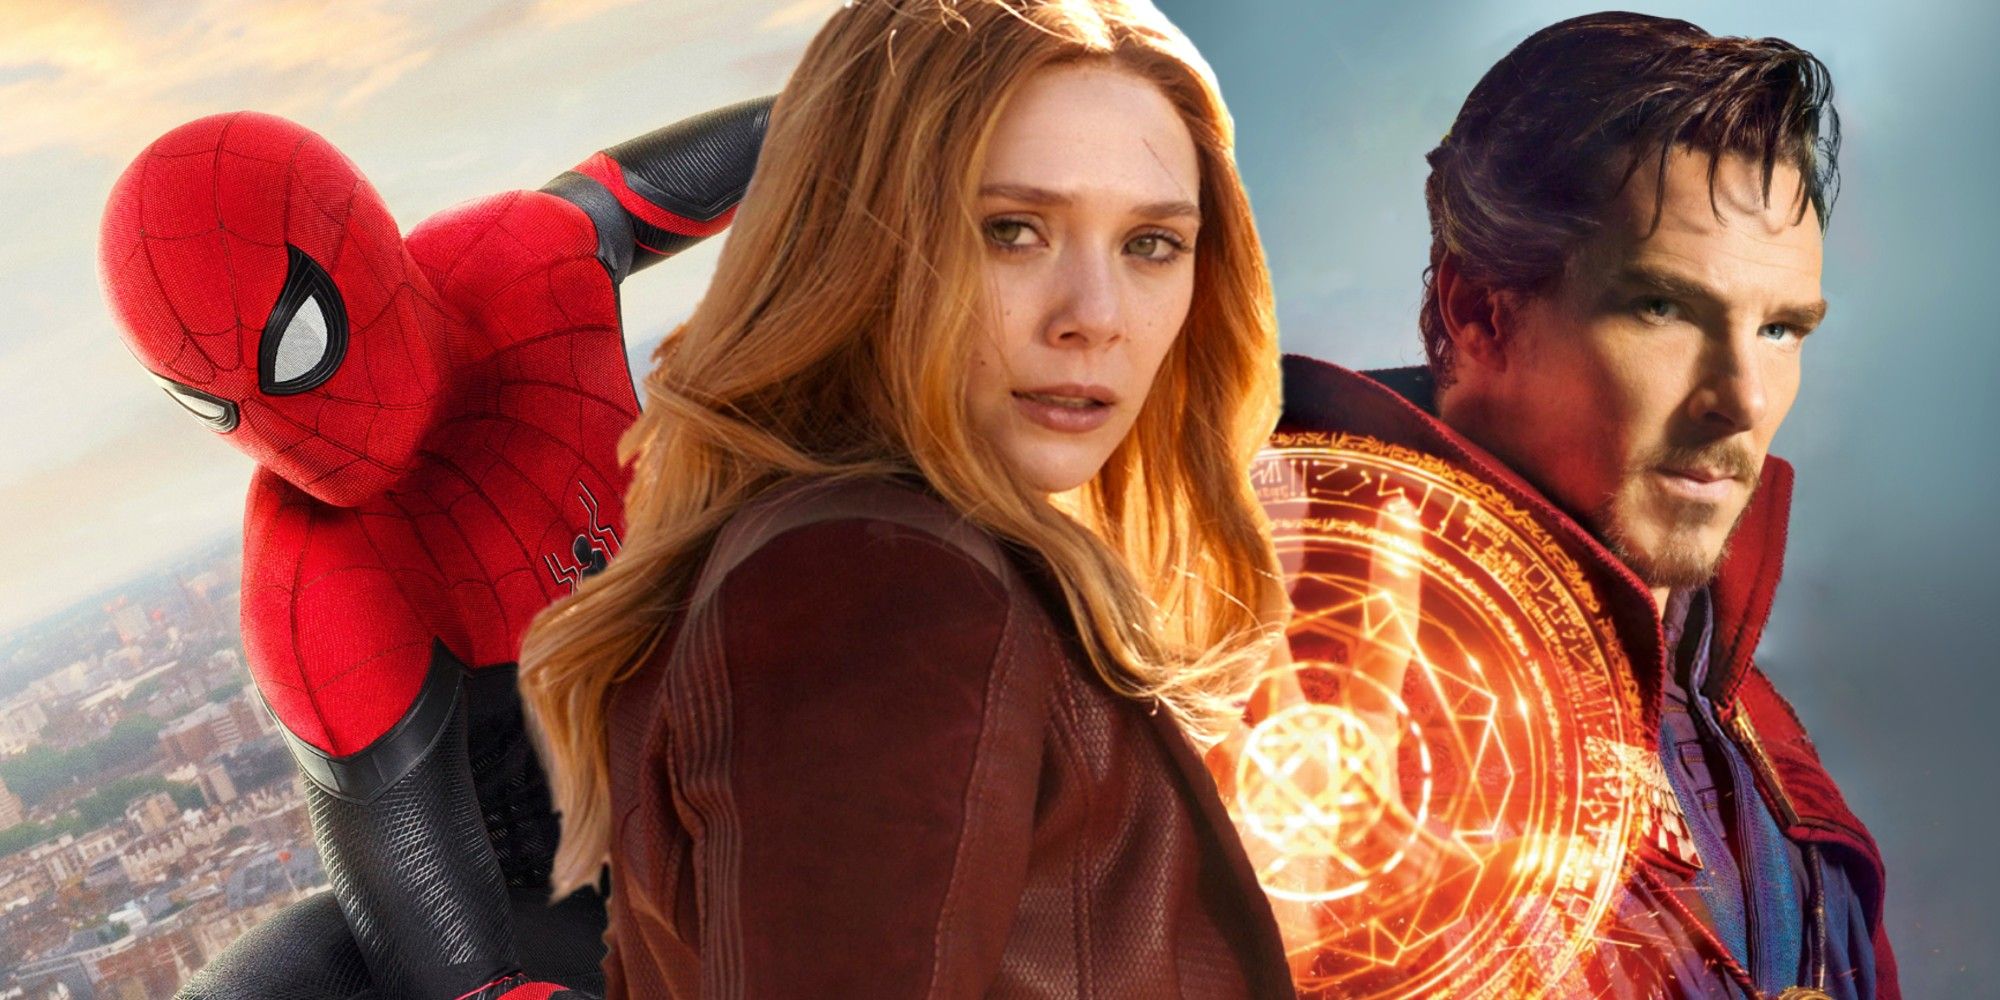 Whats Next For Scarlet Witch In The MCU After WandaVision